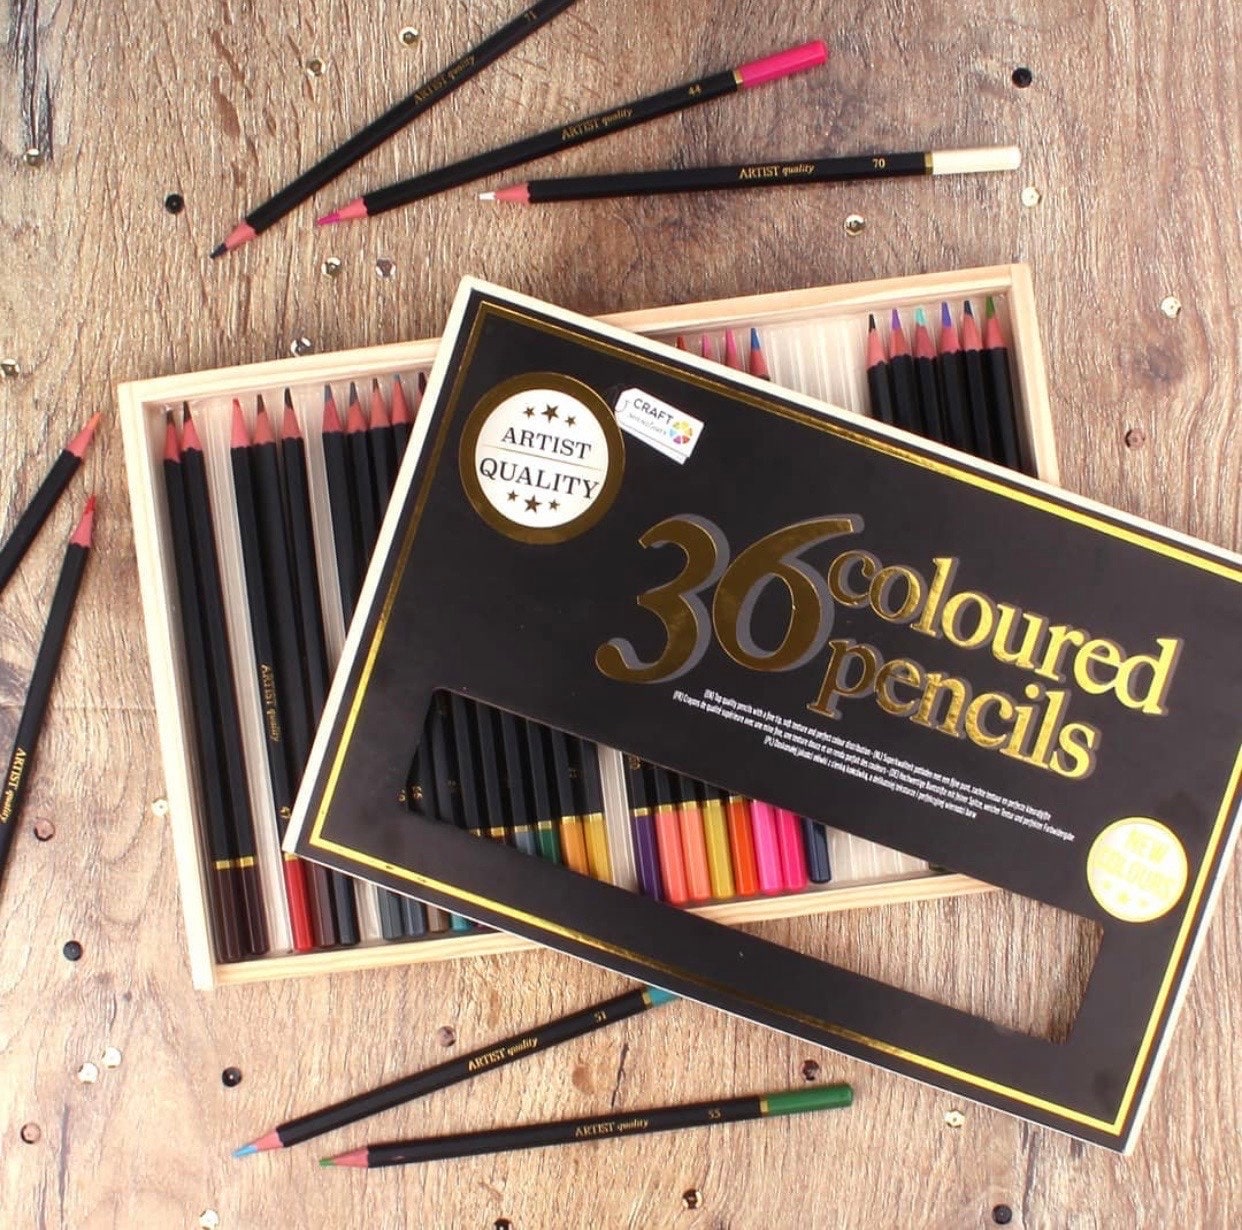 36 Pcs Colouring Pencils in Wooden Case With Mandala Coloring Book